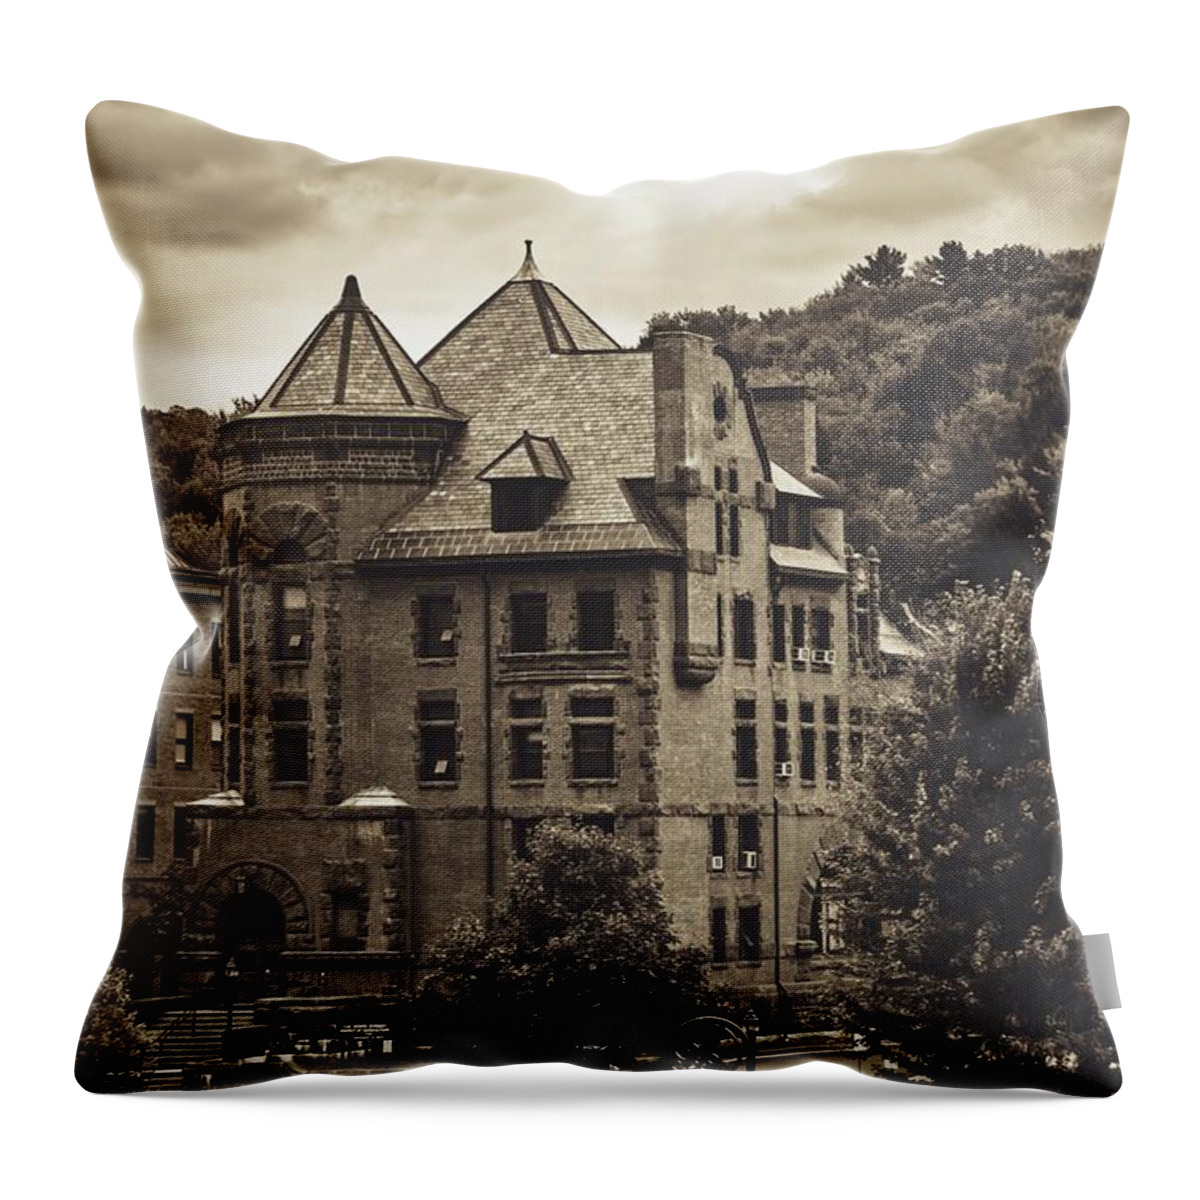 State Agriculture Building Throw Pillow featuring the photograph State Agriculture Building - Montpelier, Vermont #2 by Mountain Dreams